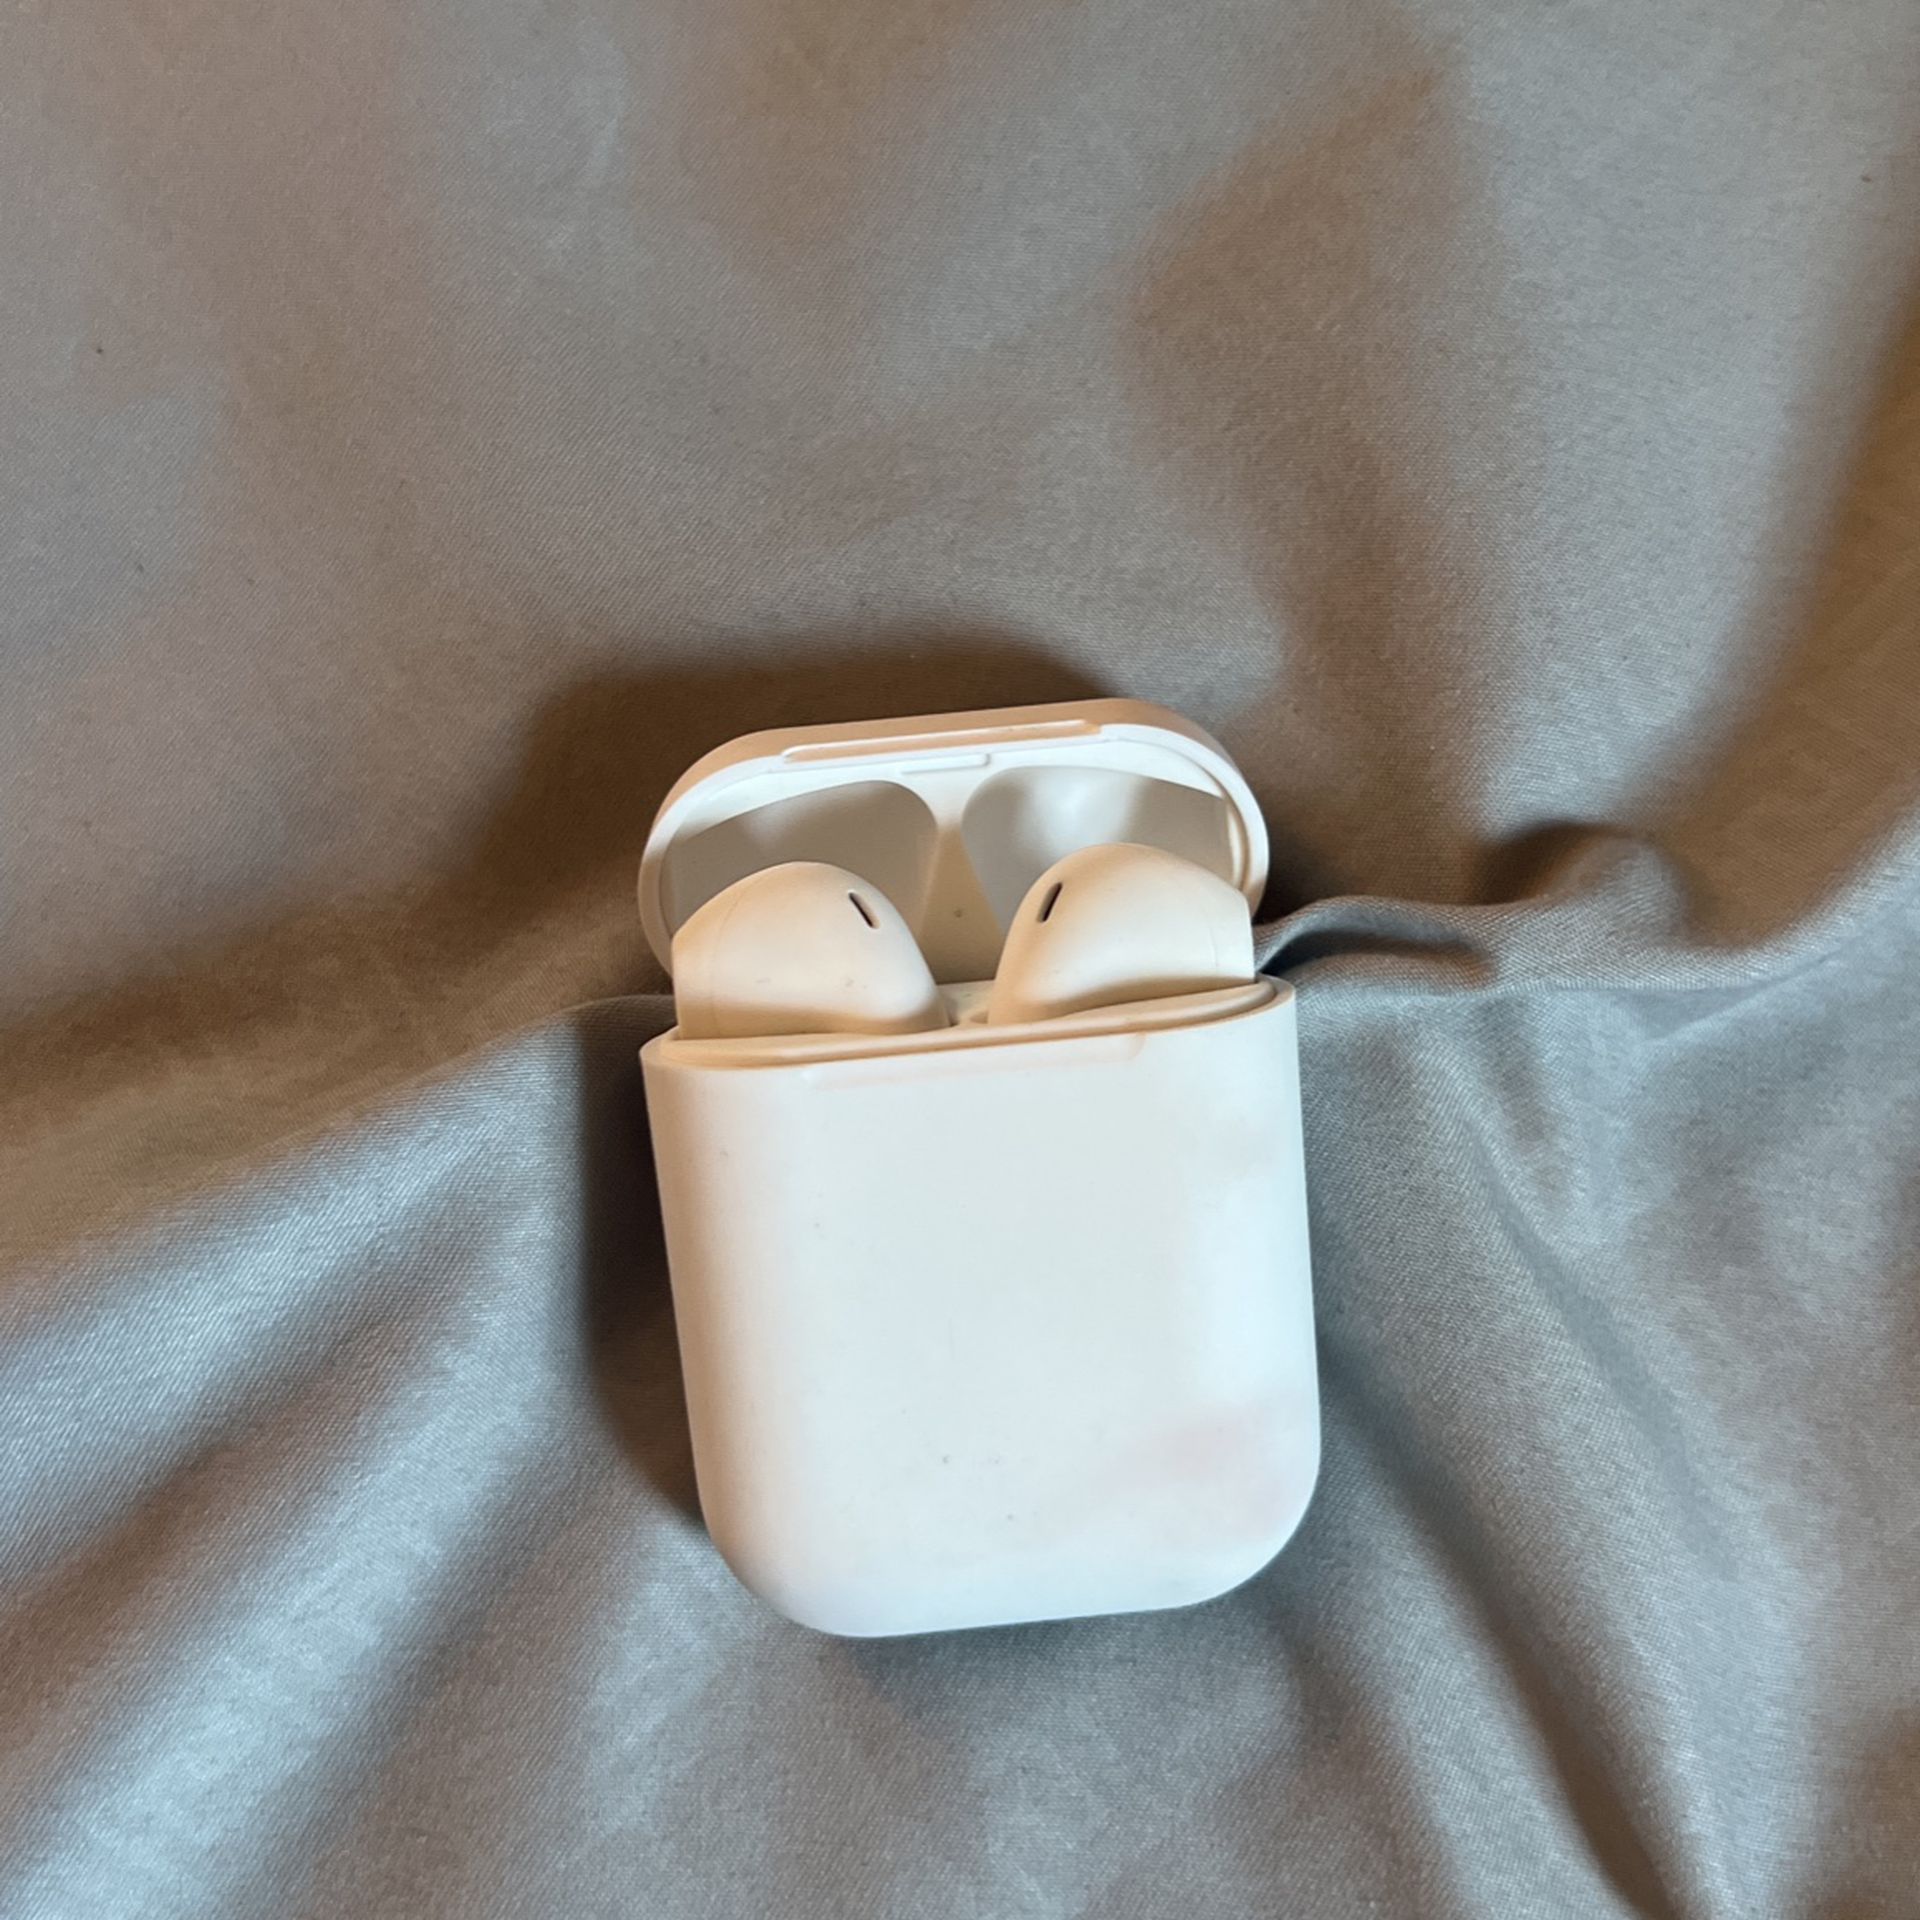 FIRST GEN AIRPODS. NEVER USED 